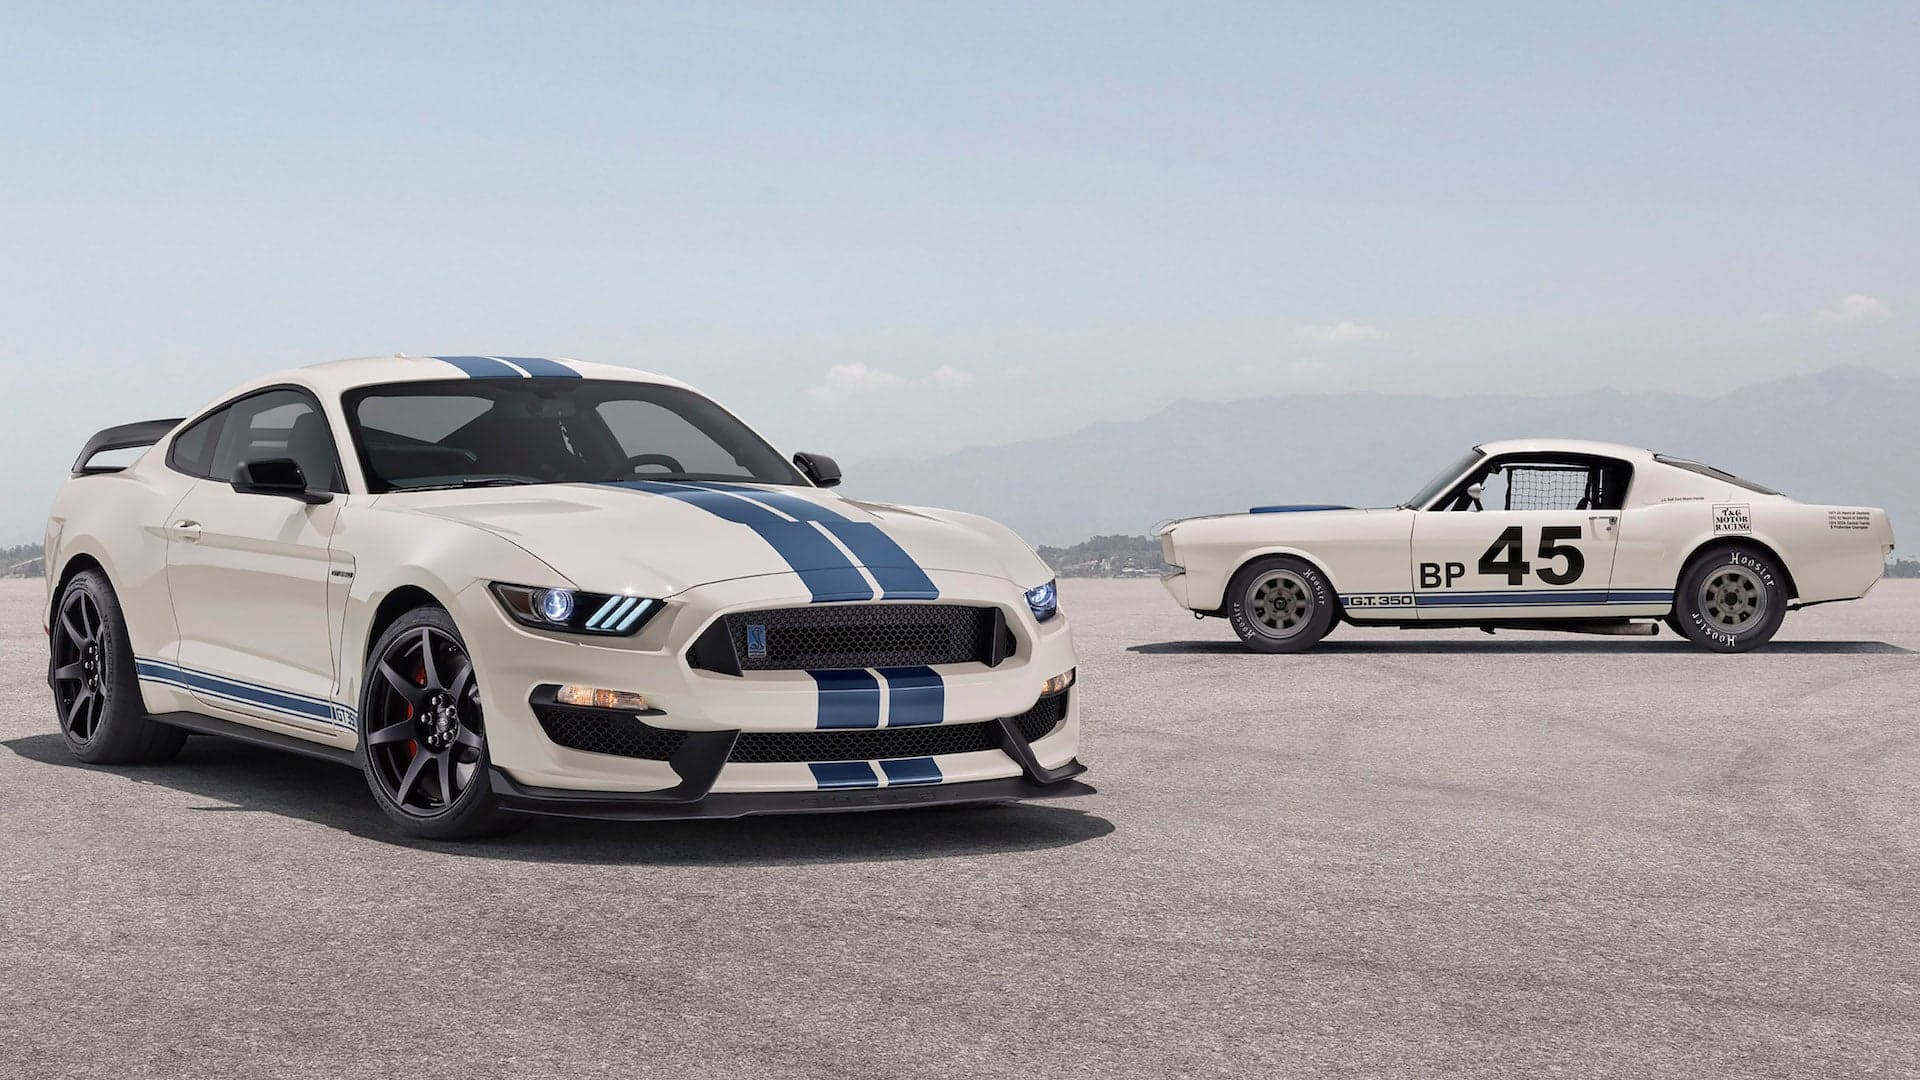 2020 Ford Mustang Shelby GT350 Heritage Edition Pays Homage to the Original Icon